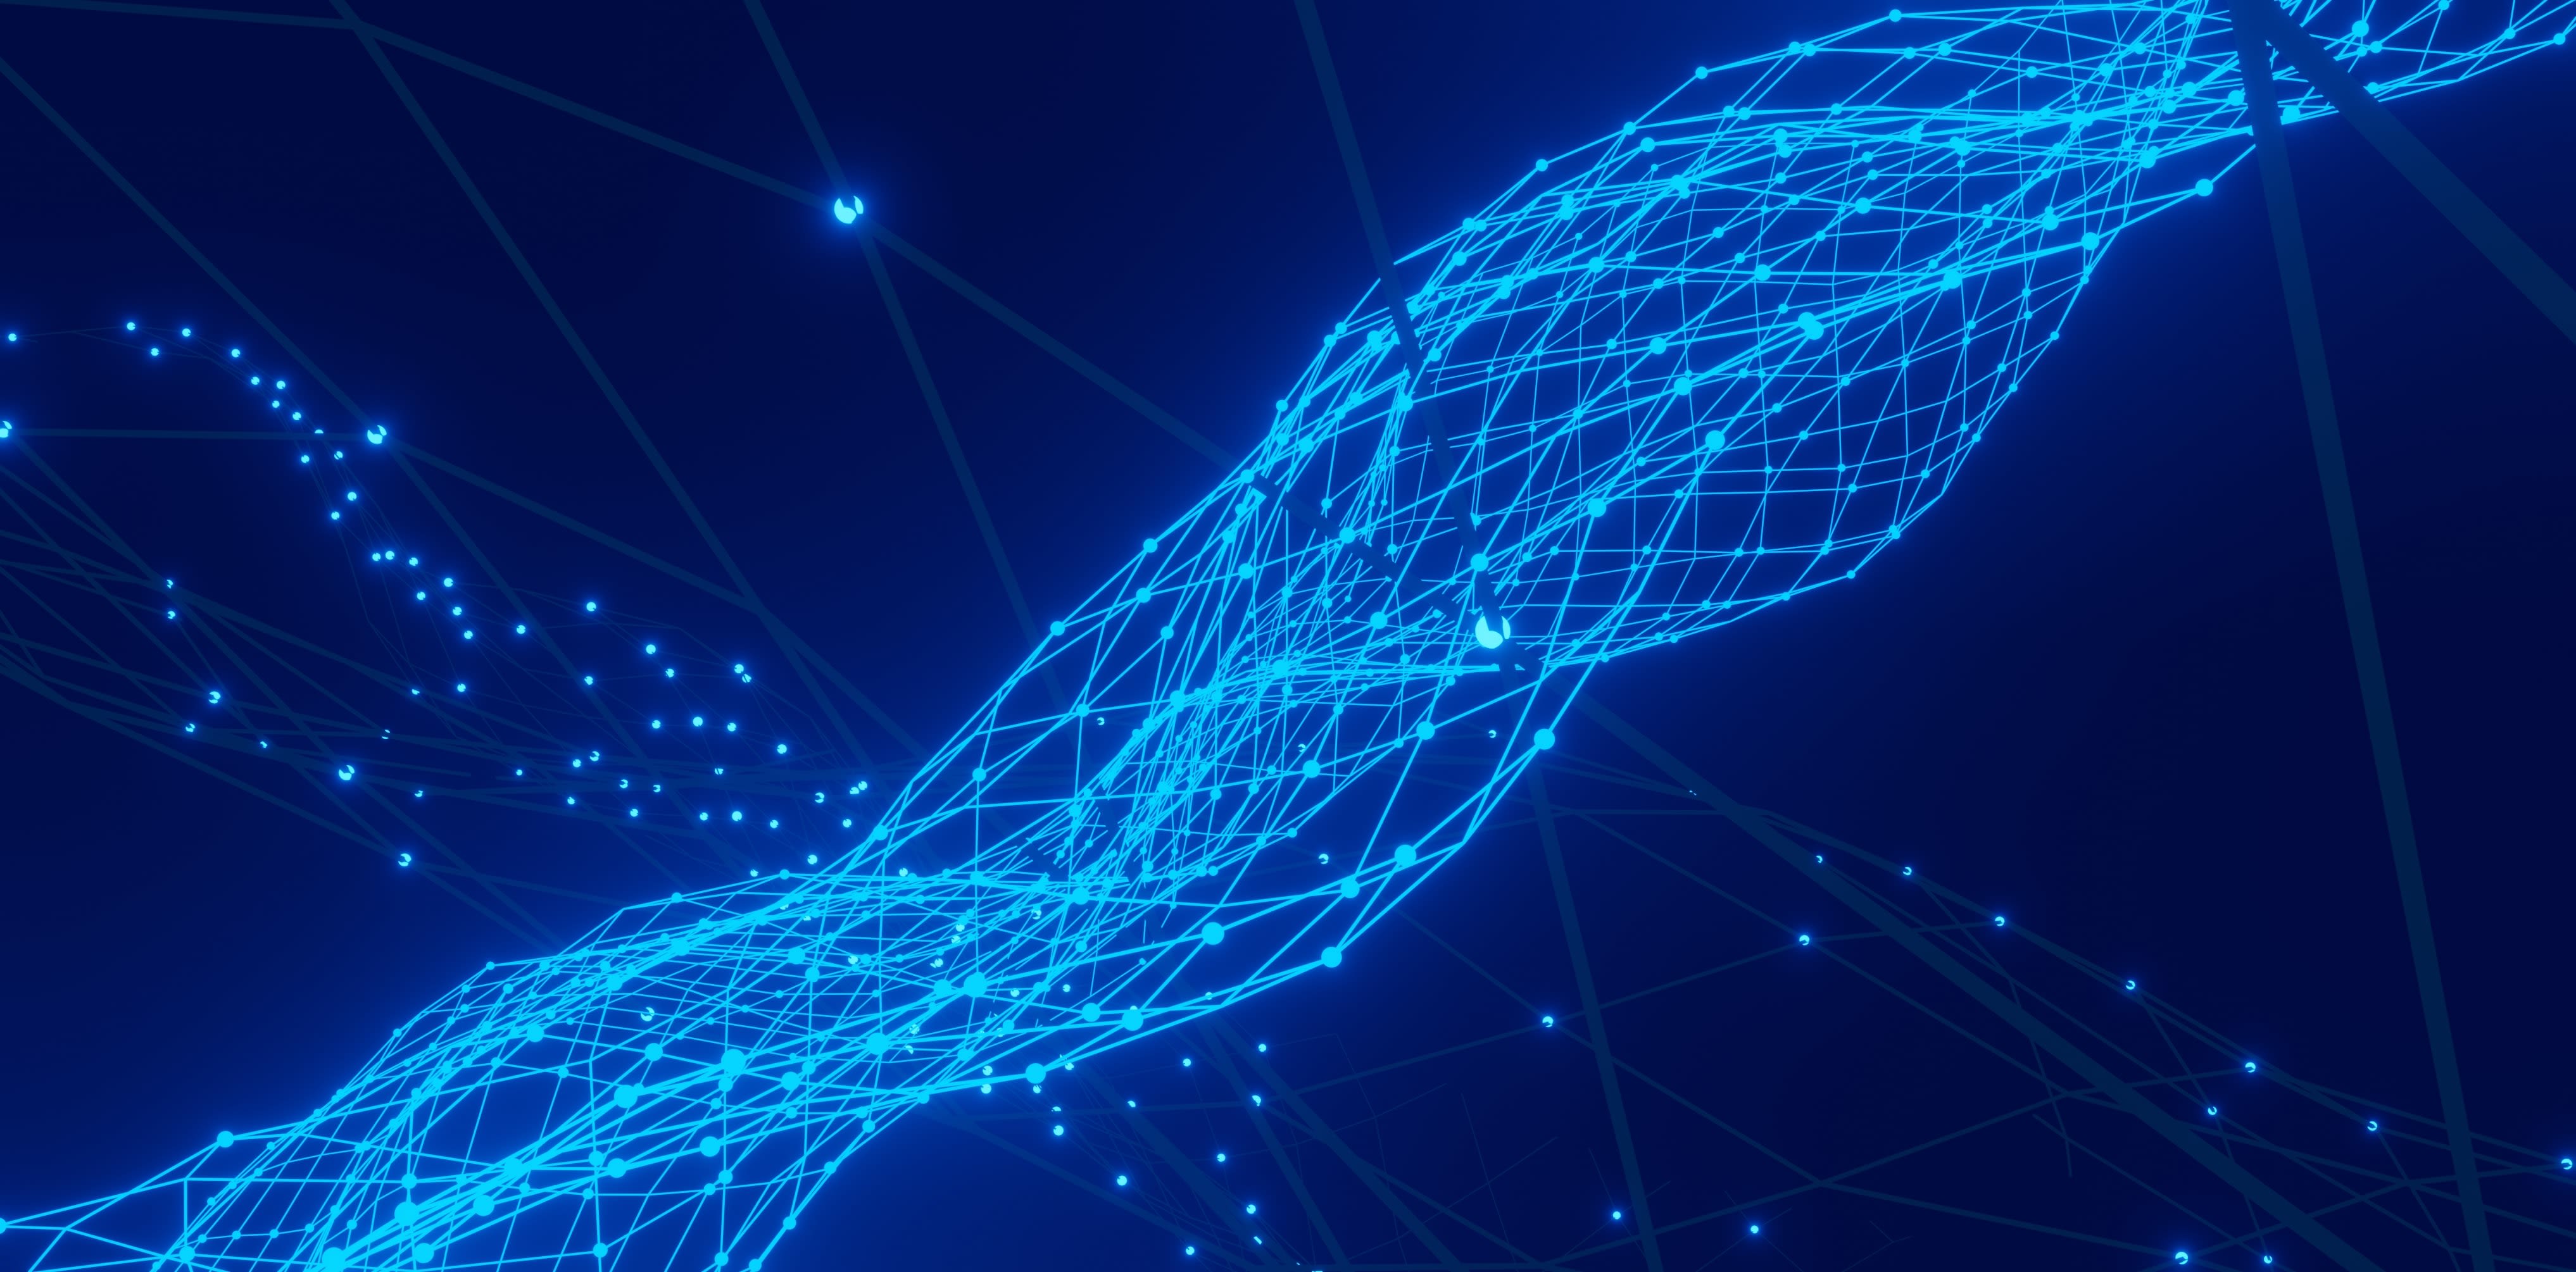 Abstract digital art showing a web of light blue connections on a dark blue background